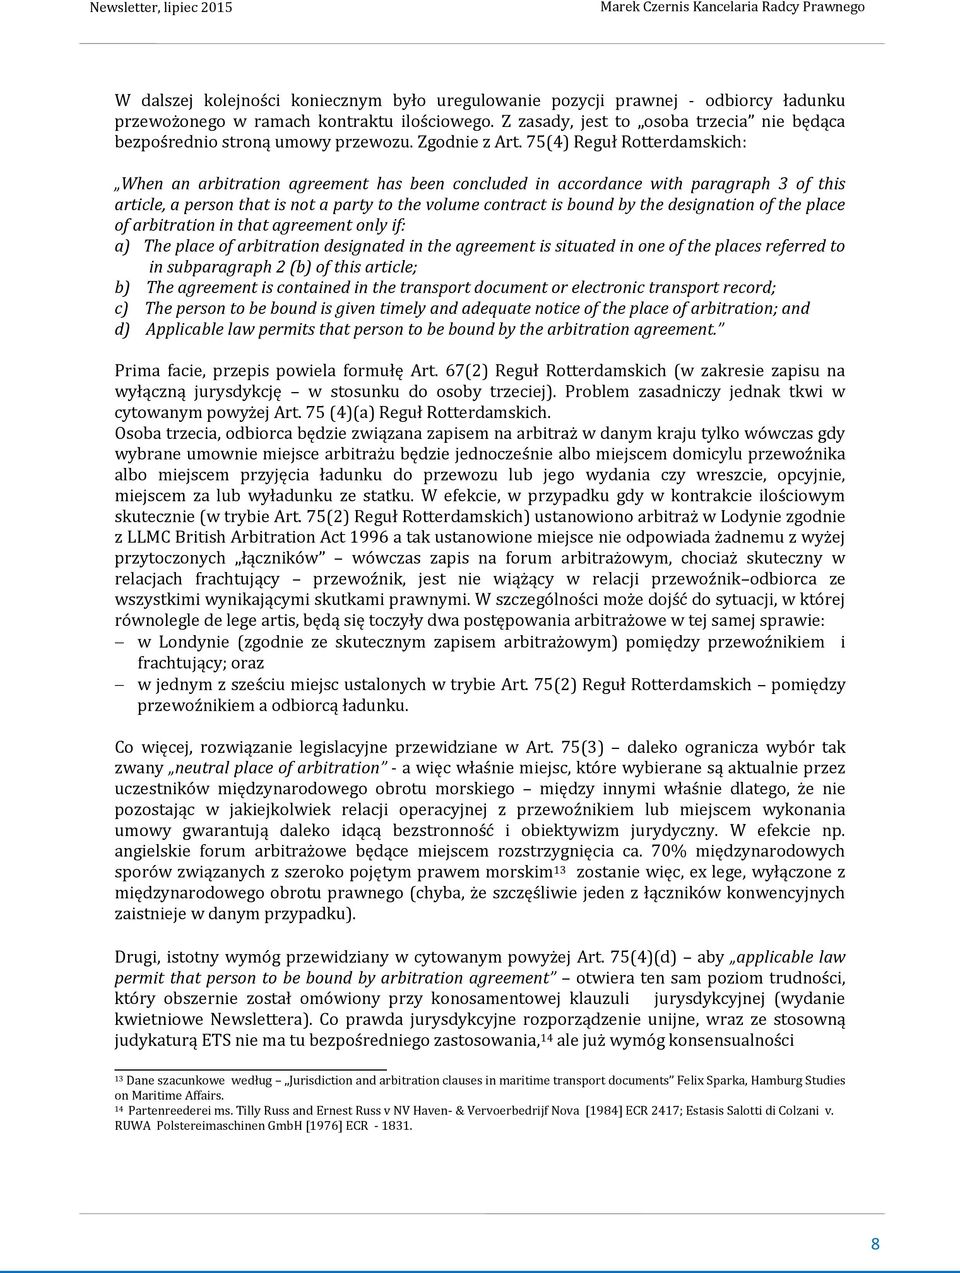 75(4) Reguł Rotterdamskich: When an arbitration agreement has been concluded in accordance with paragraph 3 of this article, a person that is not a party to the volume contract is bound by the